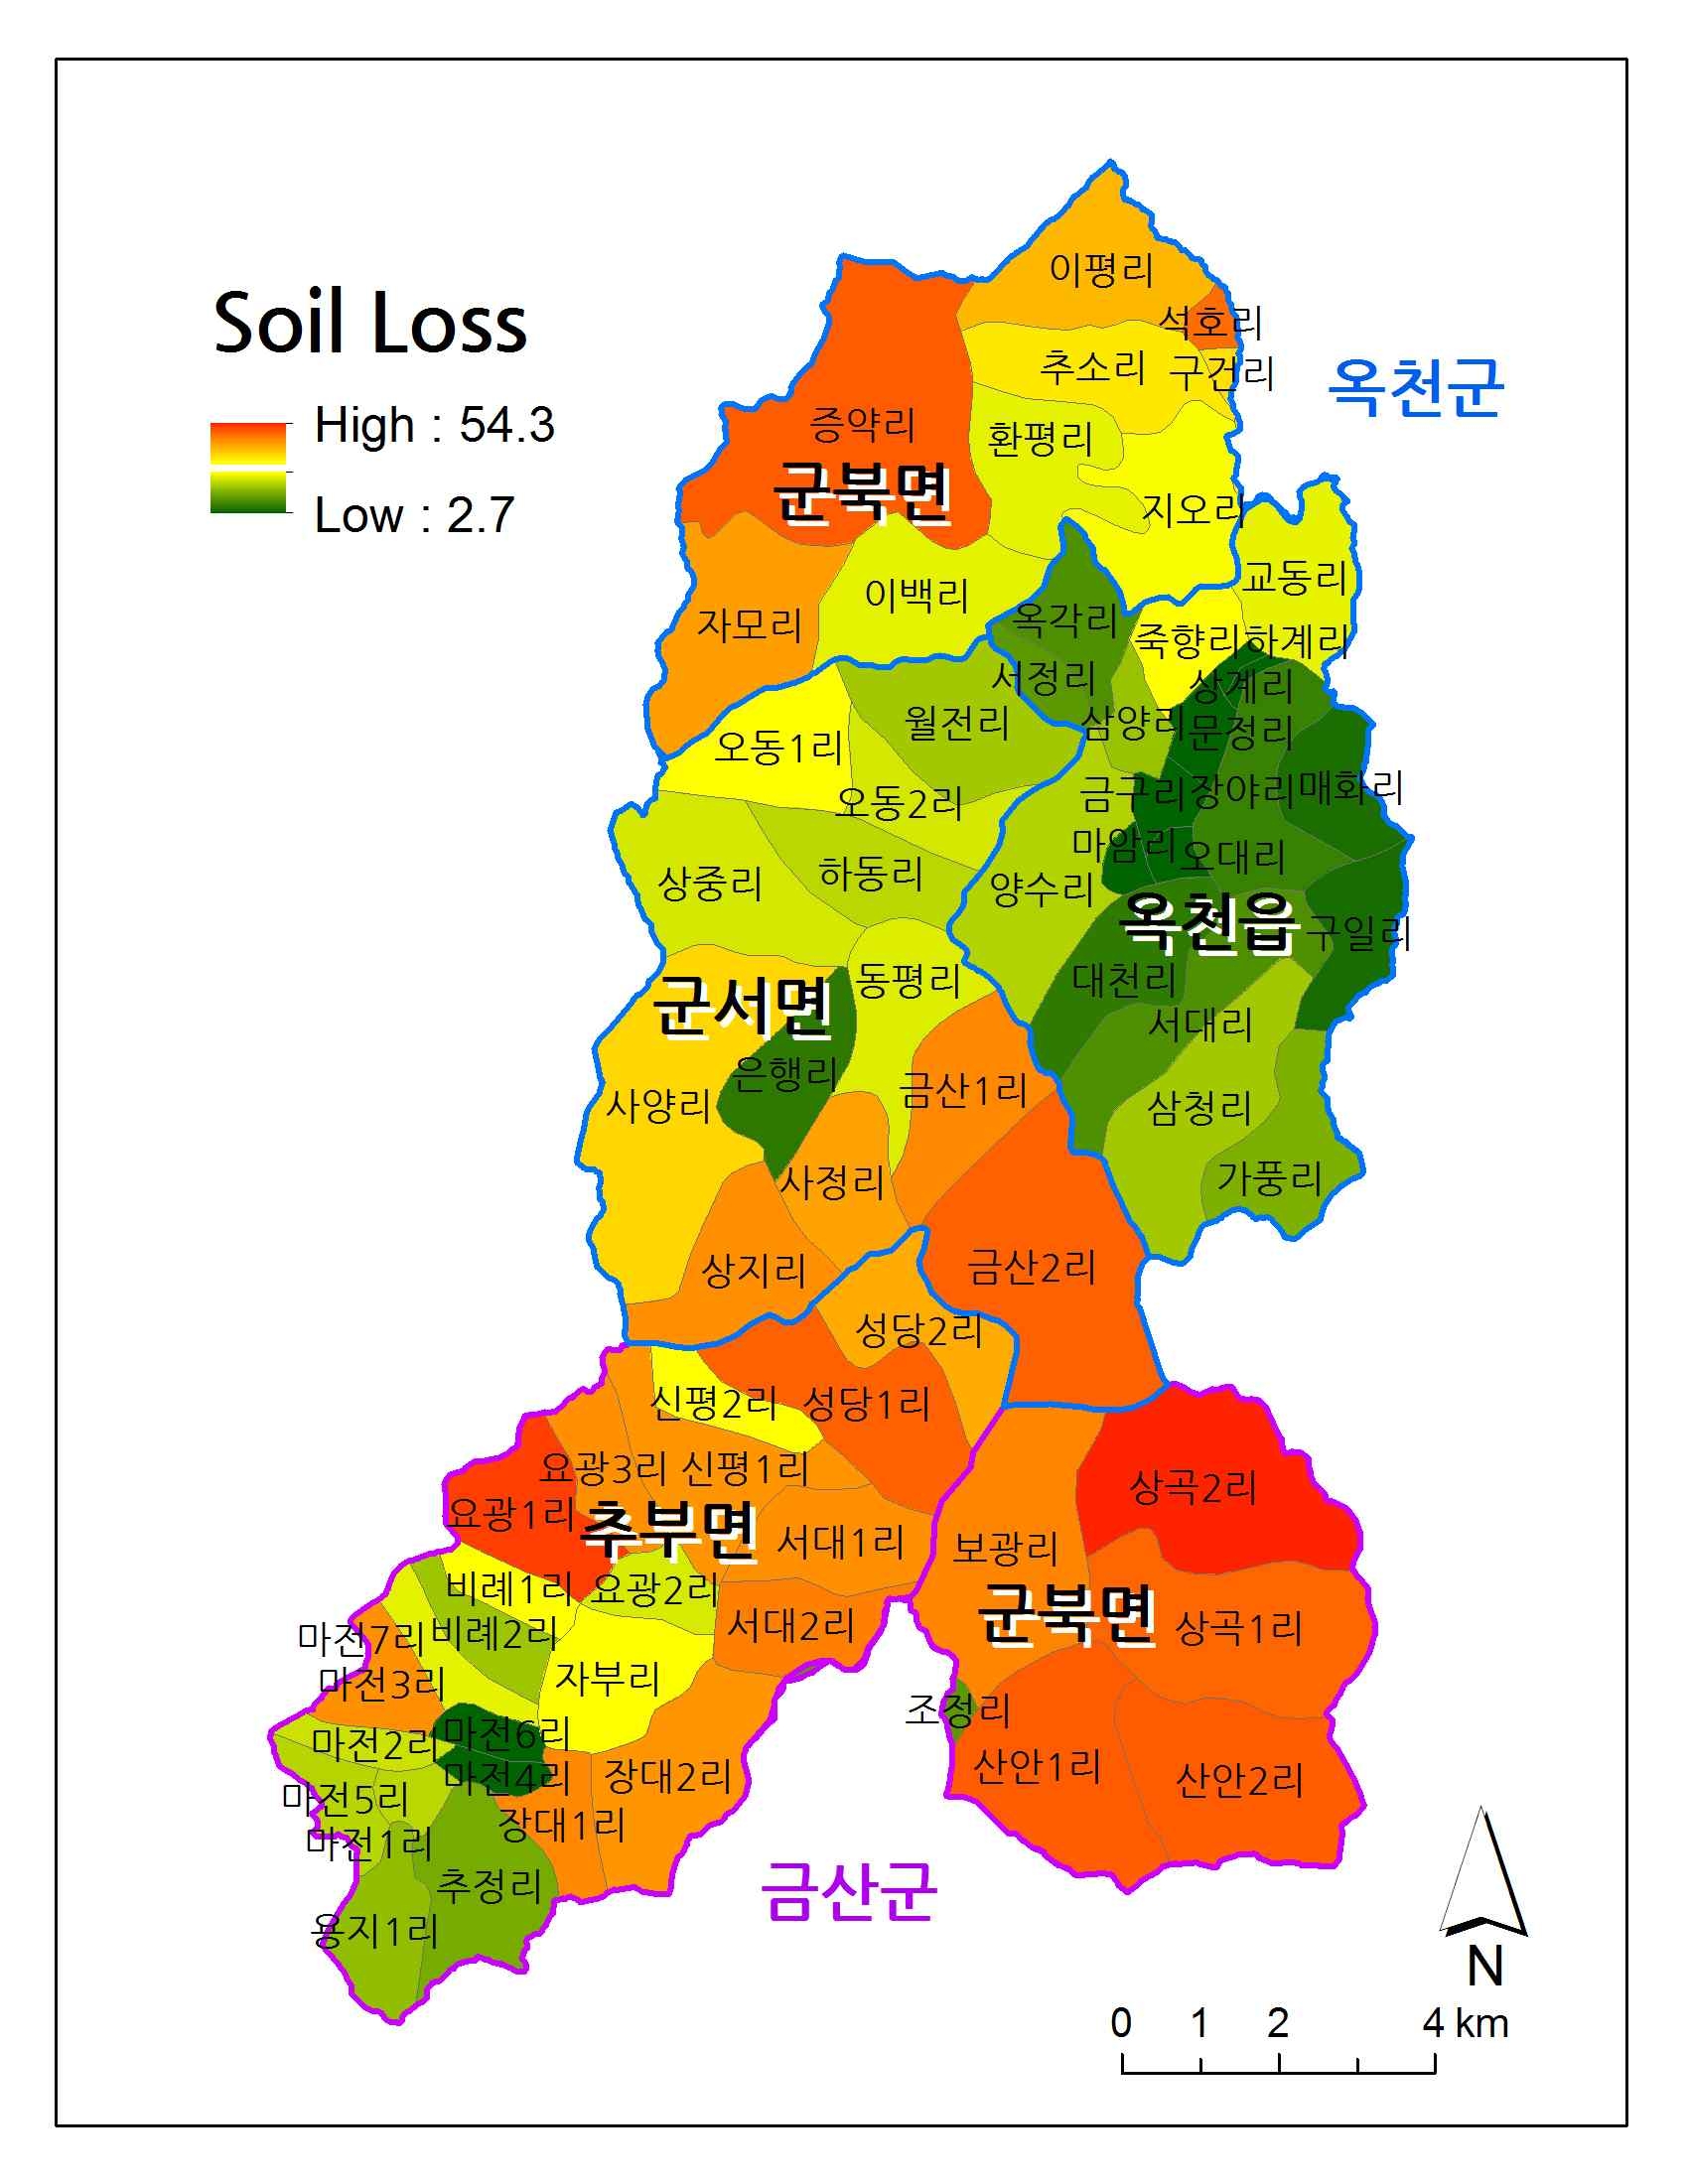 The amount of annual soil loss by an administrative district(ton/ha/yr)